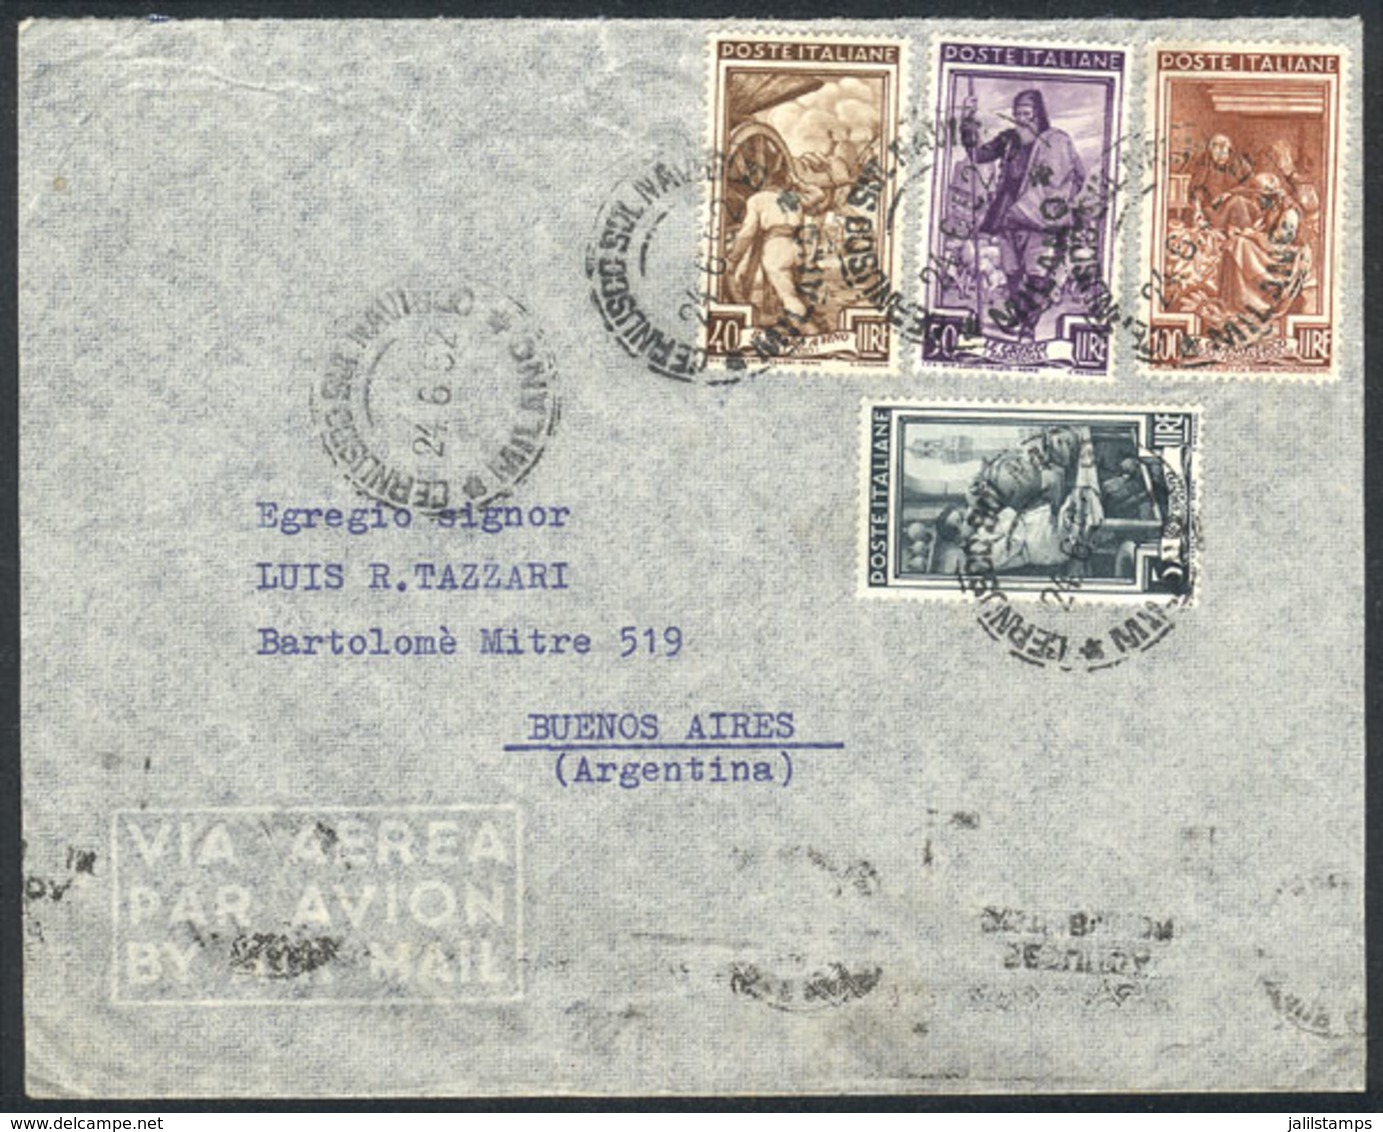 ITALY: Cover Franked By Sa.651 + Other Values (total 195L.), Sent From Cernusco To Argentina On 24/JUN/1952, Very Fine Q - Non Classés